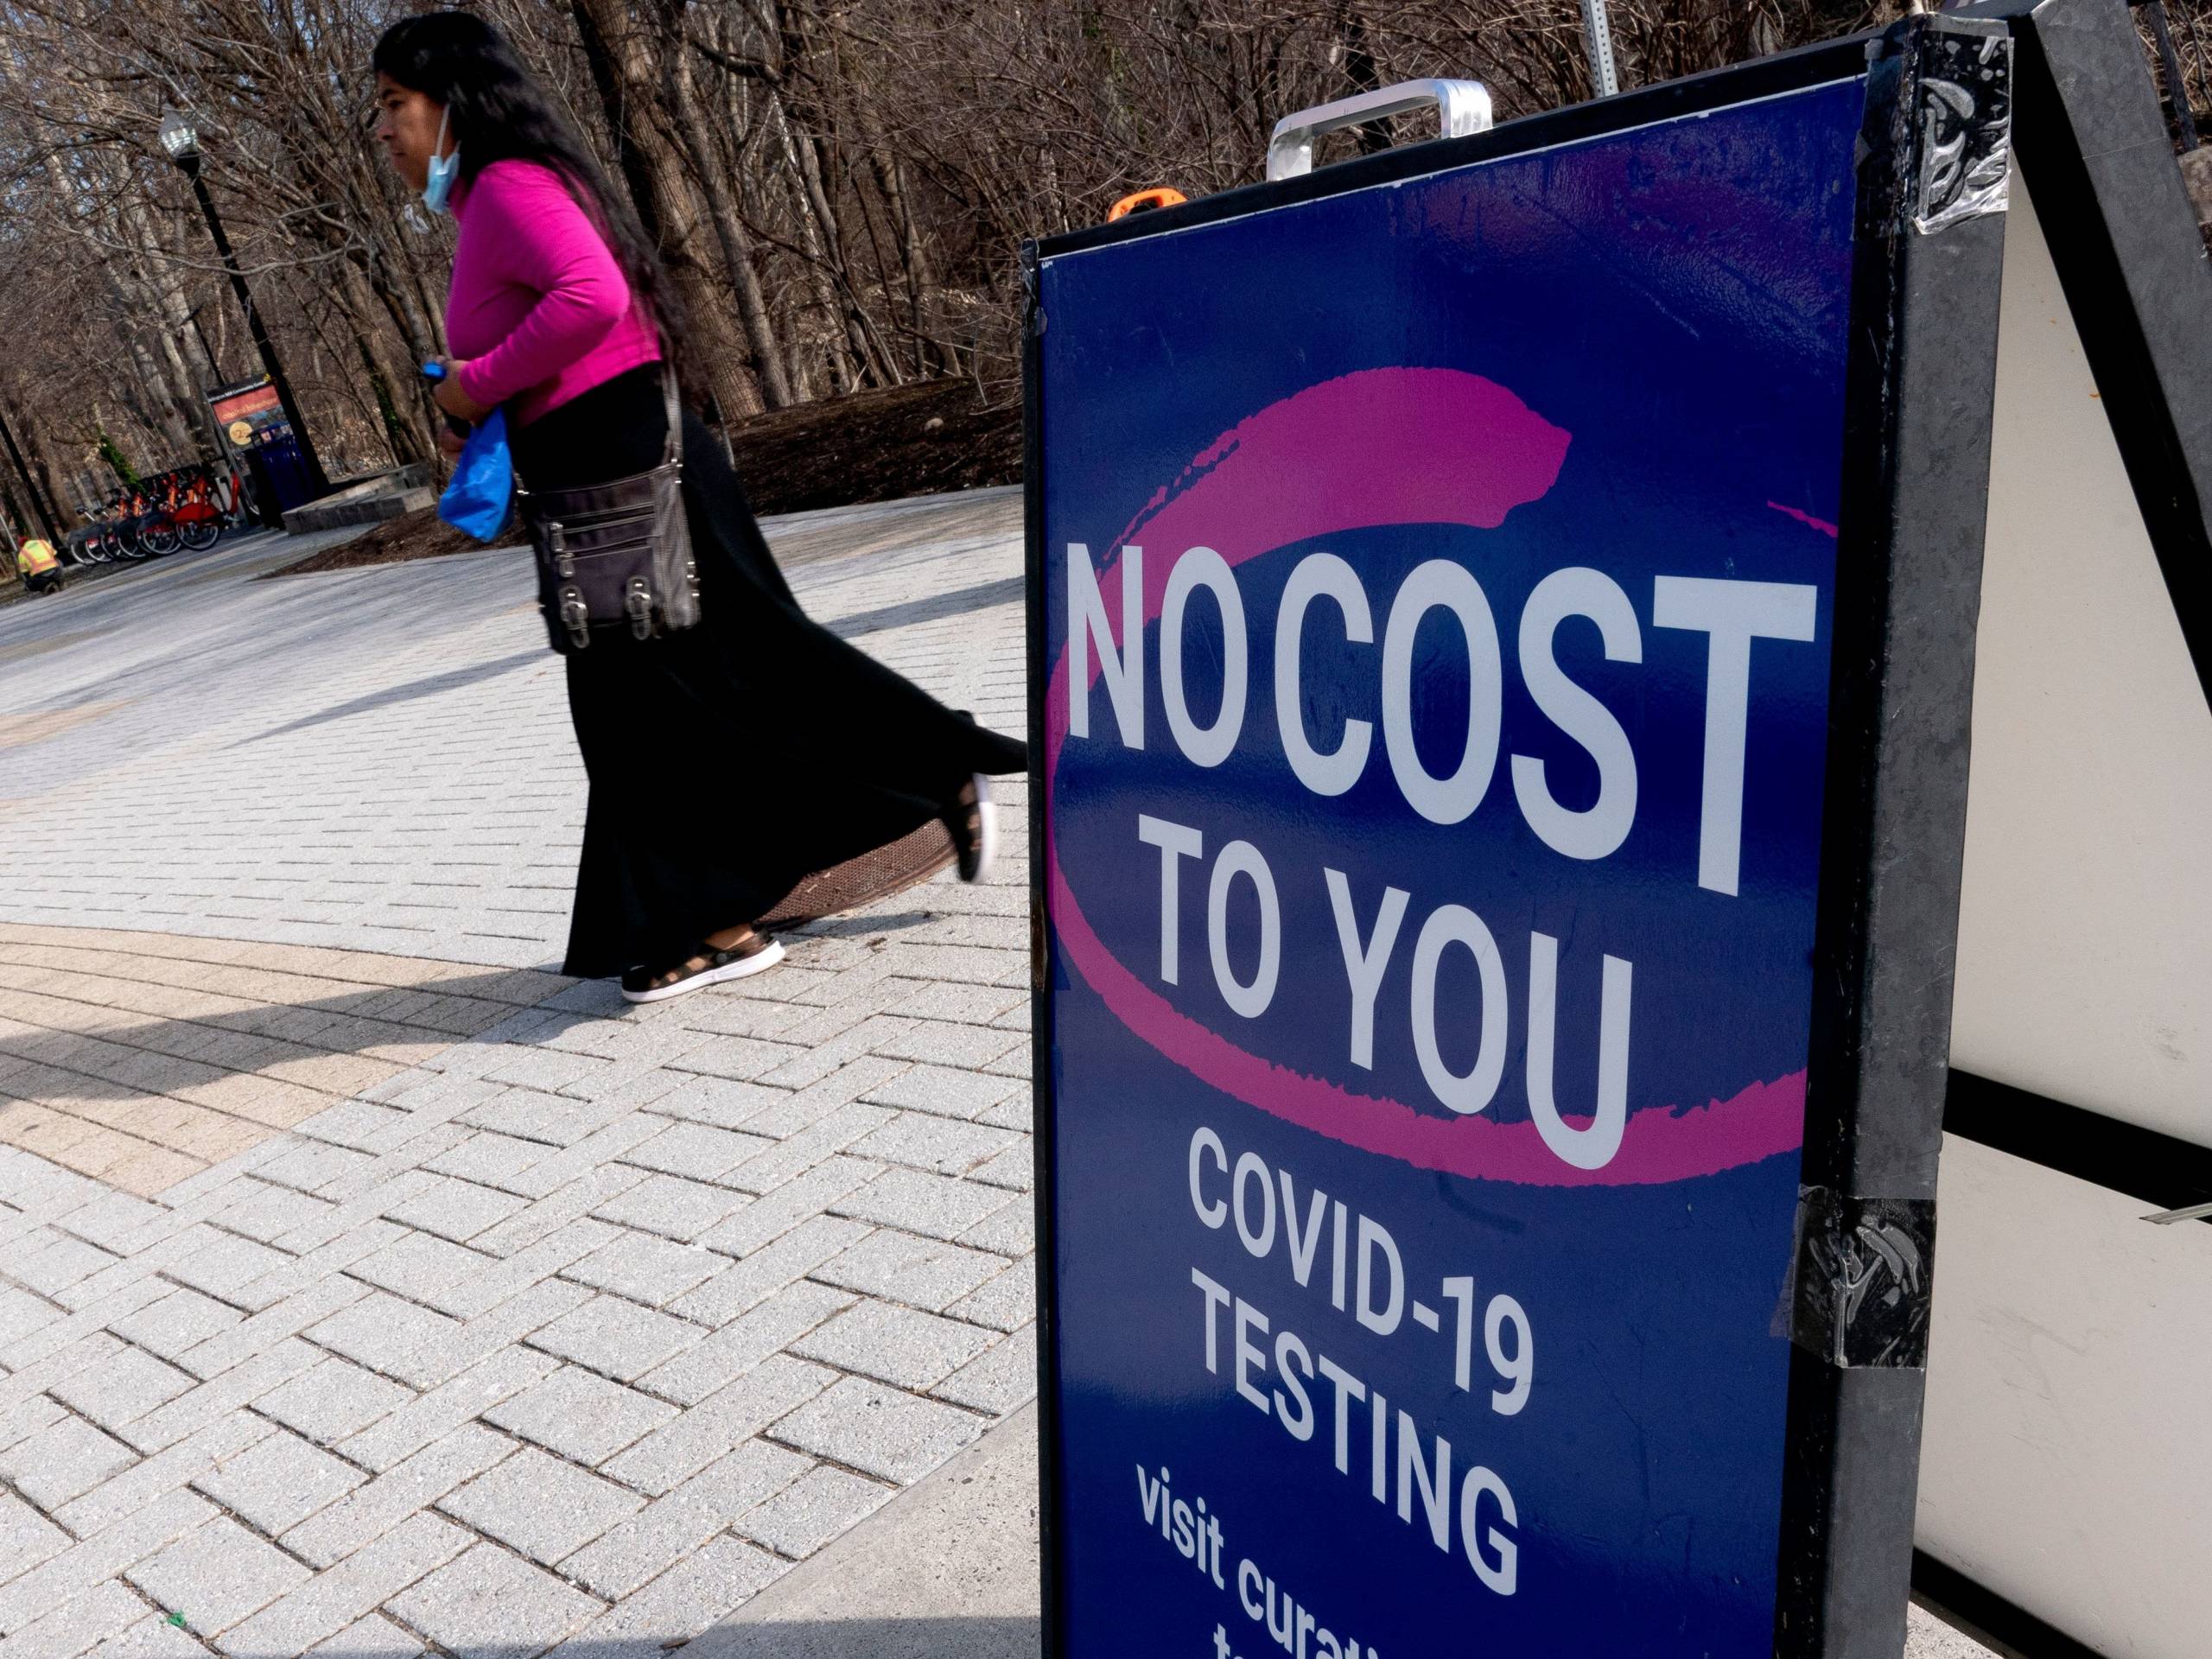 A woman with black hair and dark brown skin, wearing a black skirt and bright pink sweater walks across a stone plaza in the background. In the foreground is a blue sign saying "No Cost To You" COVID-19 Testing. A pink swirl wraps around the words: No Cost To You.